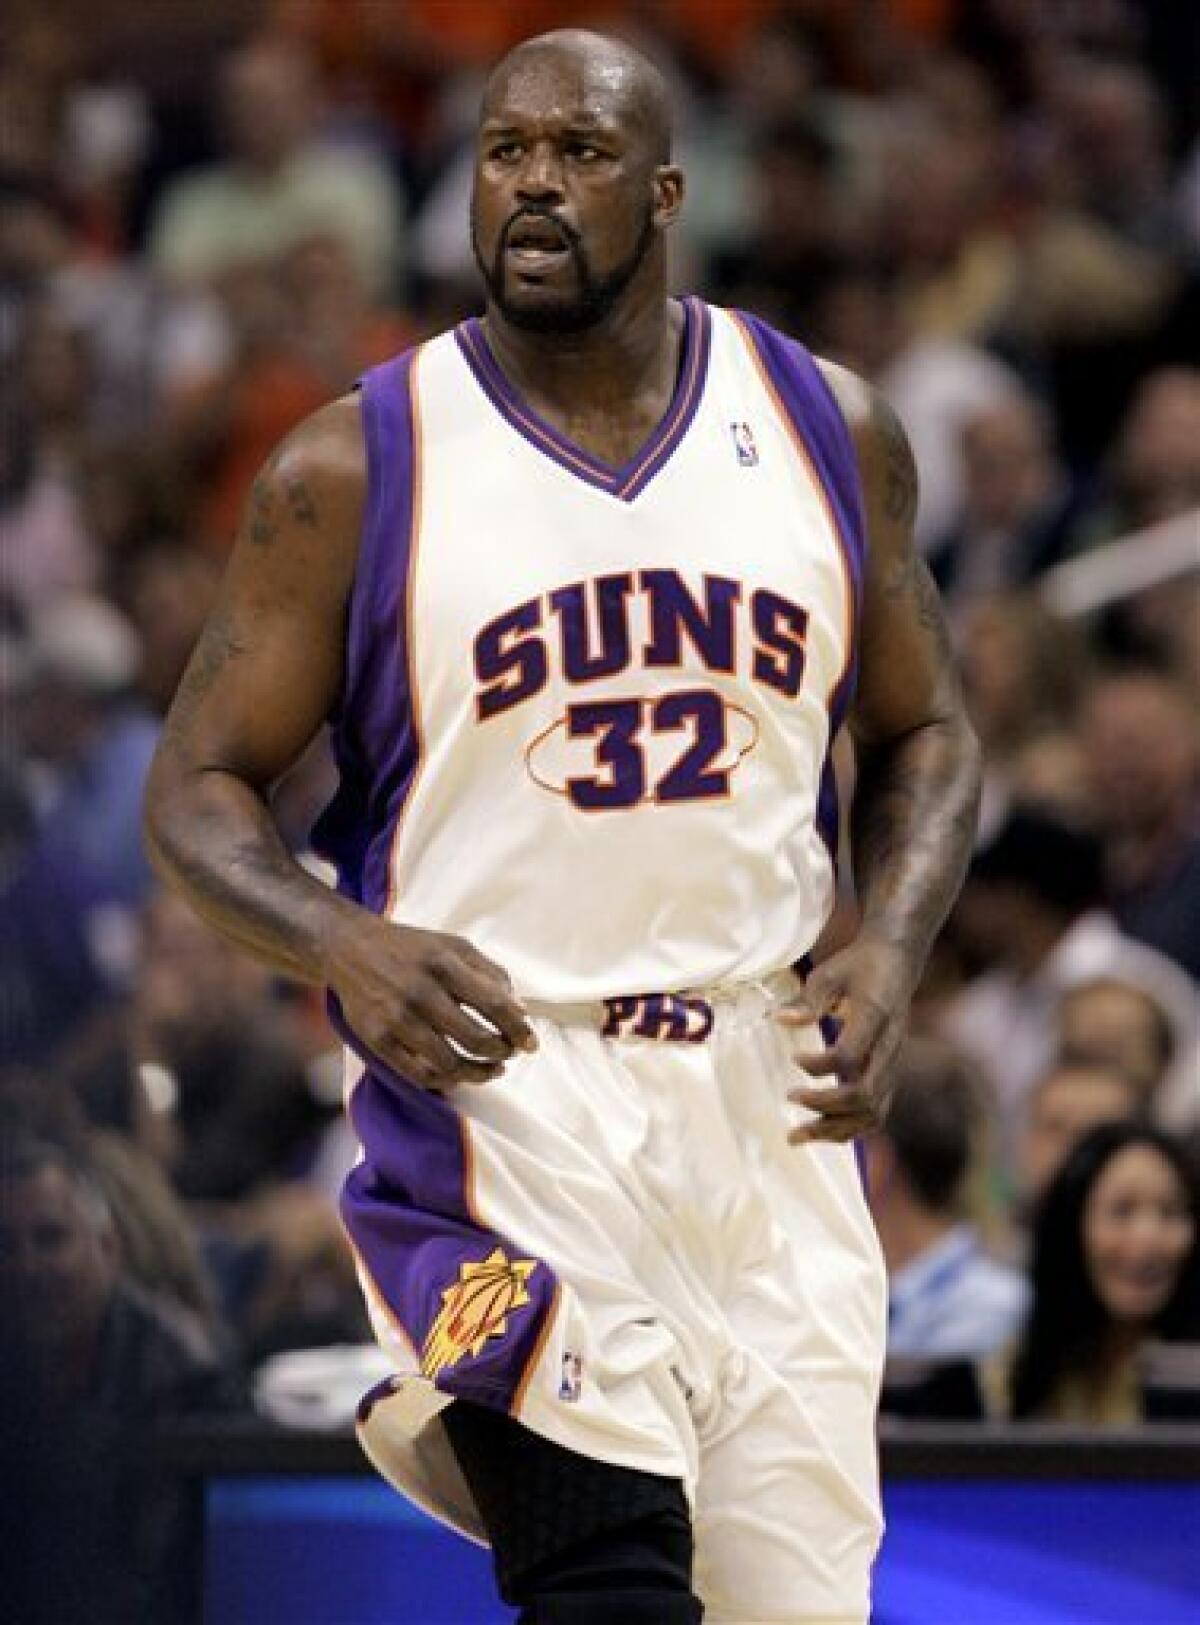 In this April 3, 2009 photo, Phoenix Suns center Shaquille O'Neal runs up the court against the Sacramento Kings during the first quarter of an NBA basketball game in Phoenix. The Cleveland Cavaliers are close to acquiring O'Neal in a trade that would pair him with MVP LeBron James, two people with knowledge of the deal told The Associated Press on Thursday, June 25, 2009. (AP Photo/Matt York)